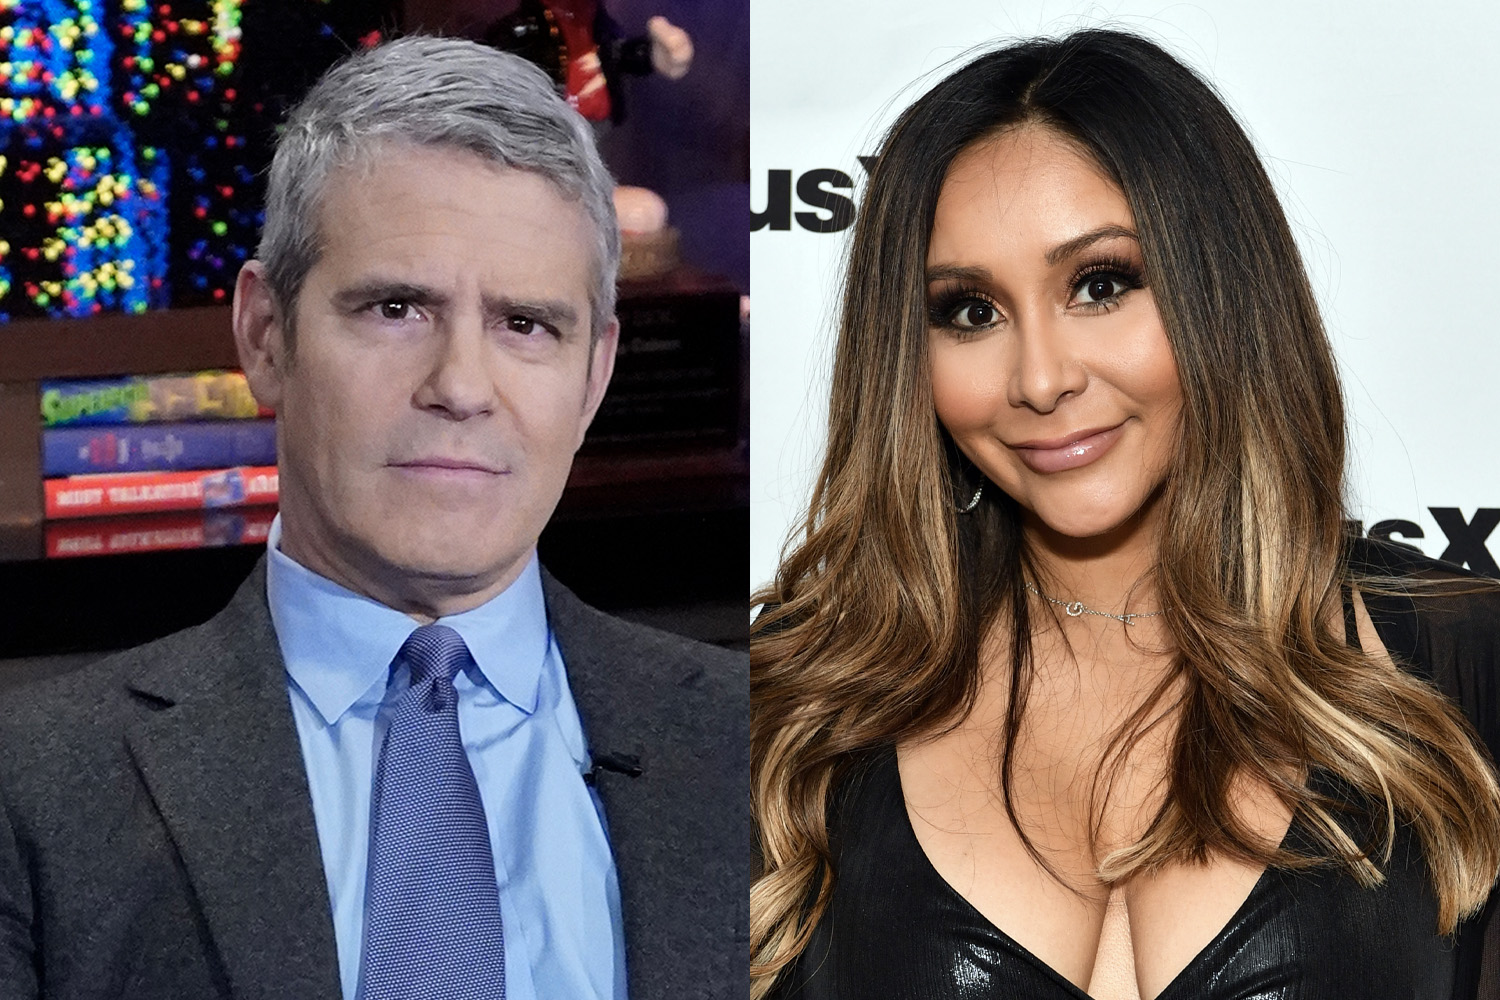 Andy Cohen poses for the camera on the set of 'WWHL' and Snooki smiles at a SiriusXM event